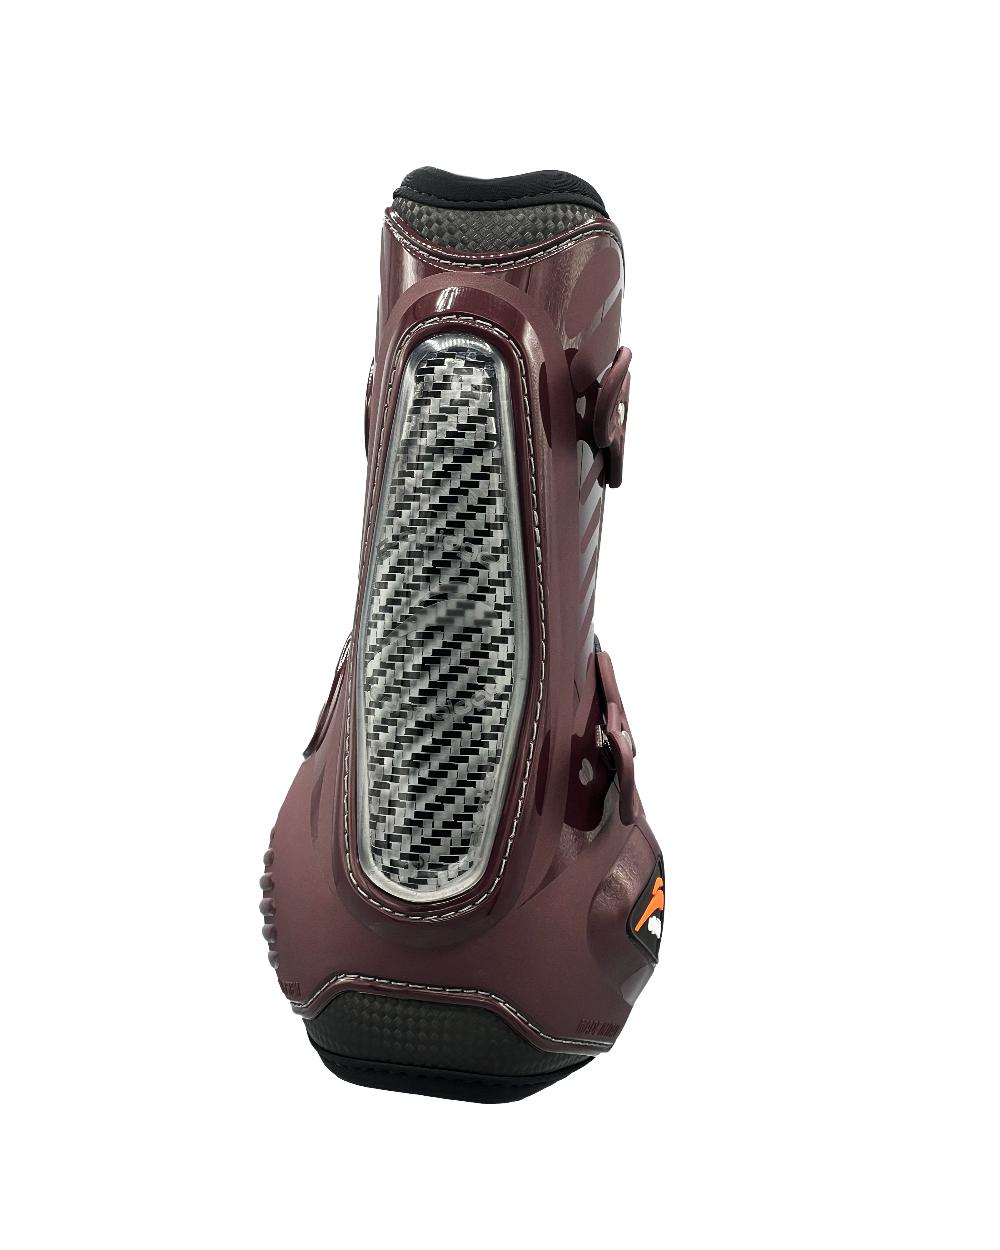 eQuick - eCarbon shock - Front Brown - Lead Sports